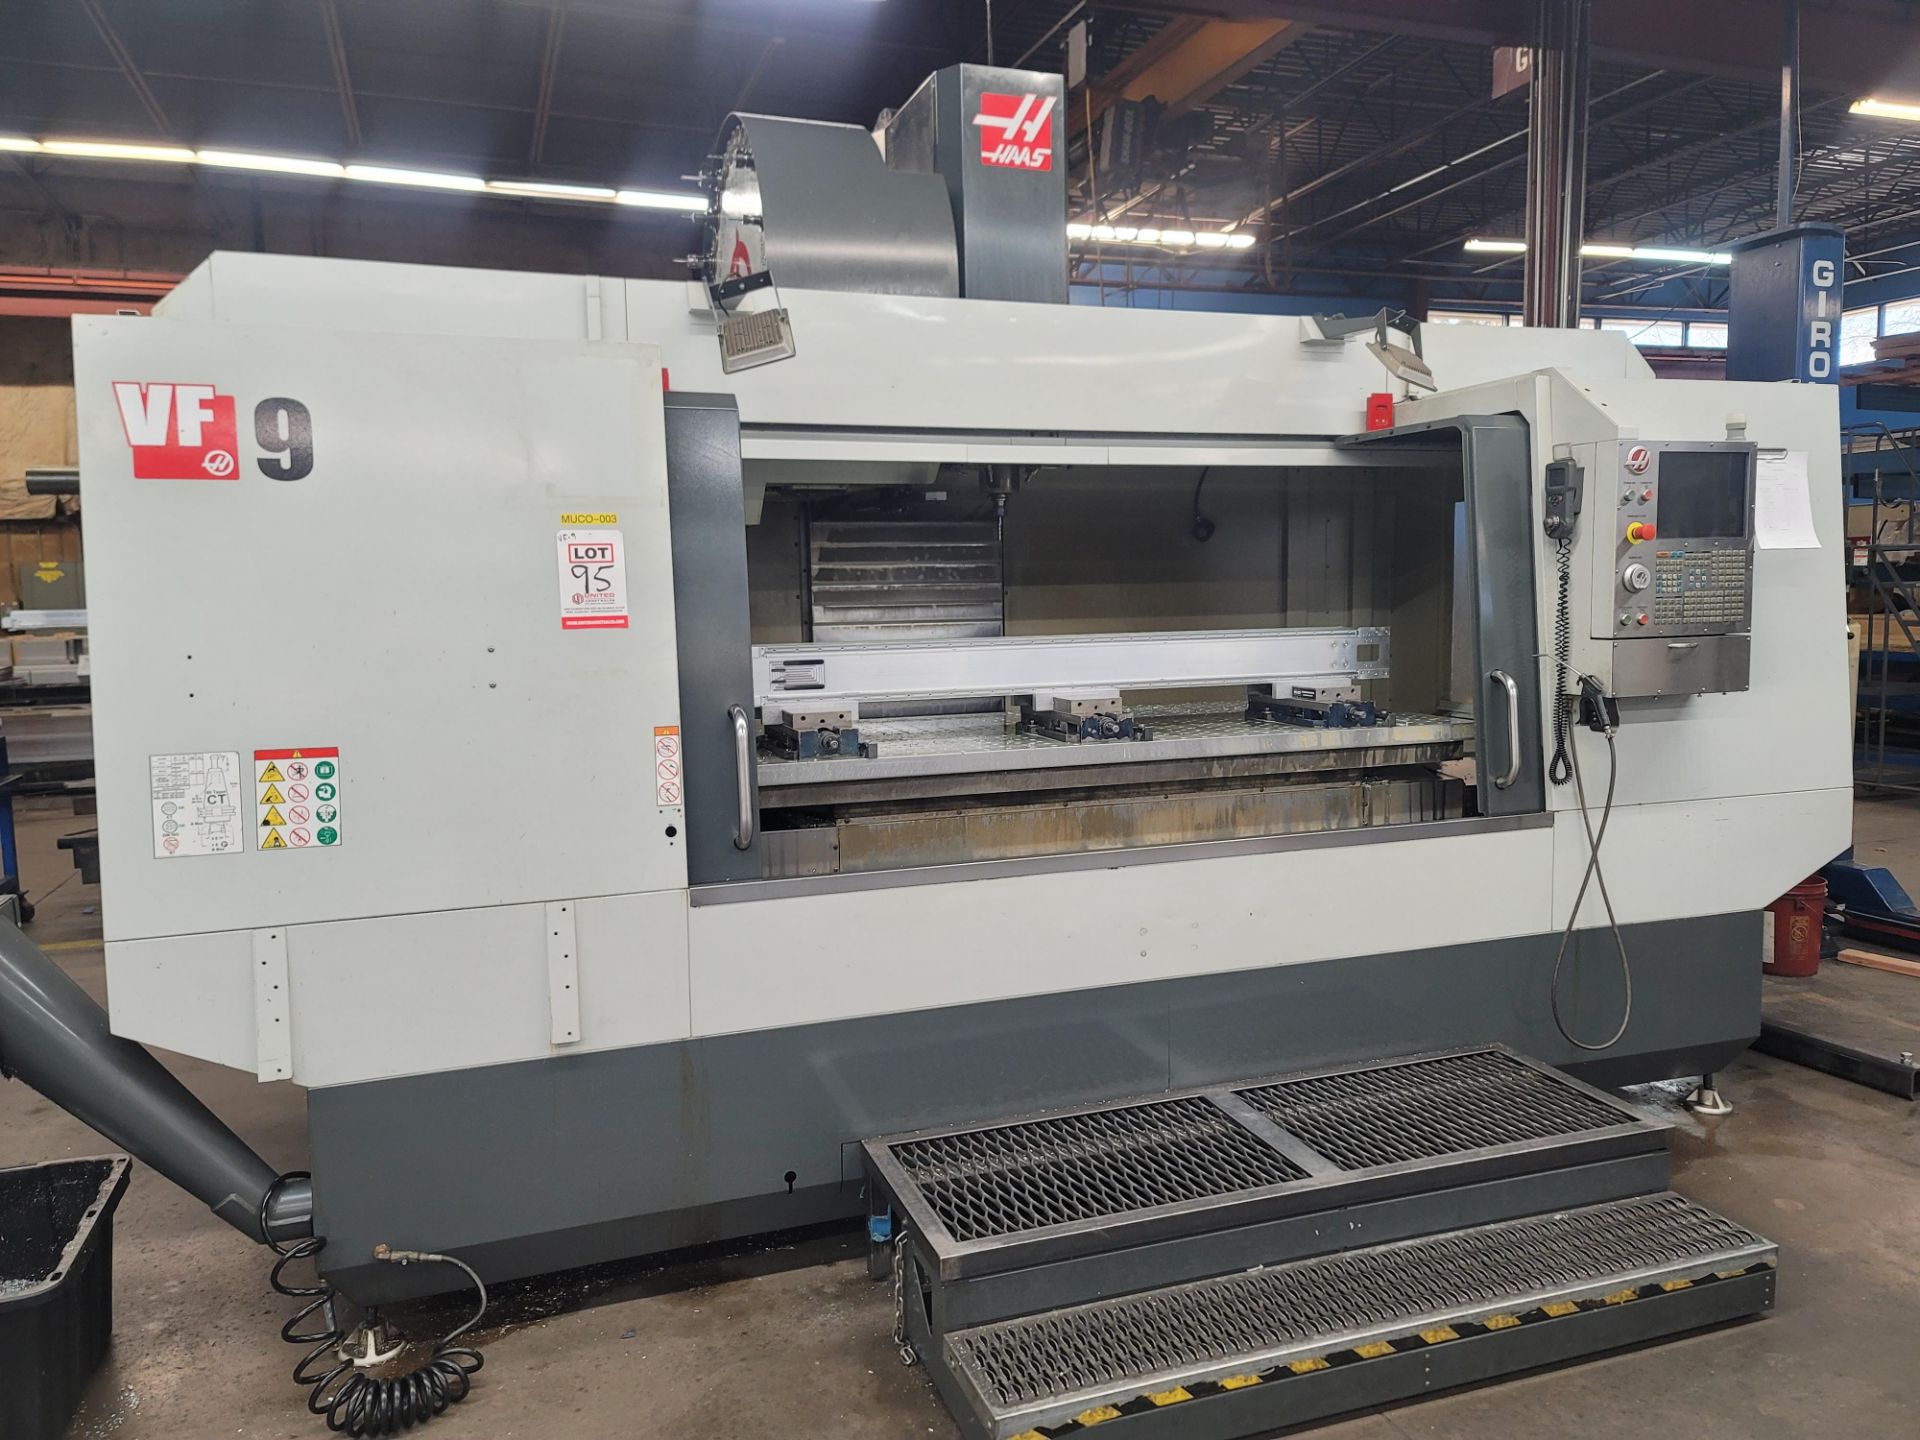 2017 HAAS VF-9/40 VERTICAL MACHINING CENTER, XYZ TRAVELS: 84" X 40" X 30", 84" X 36" TABLE, 8100 RPM - Image 5 of 28